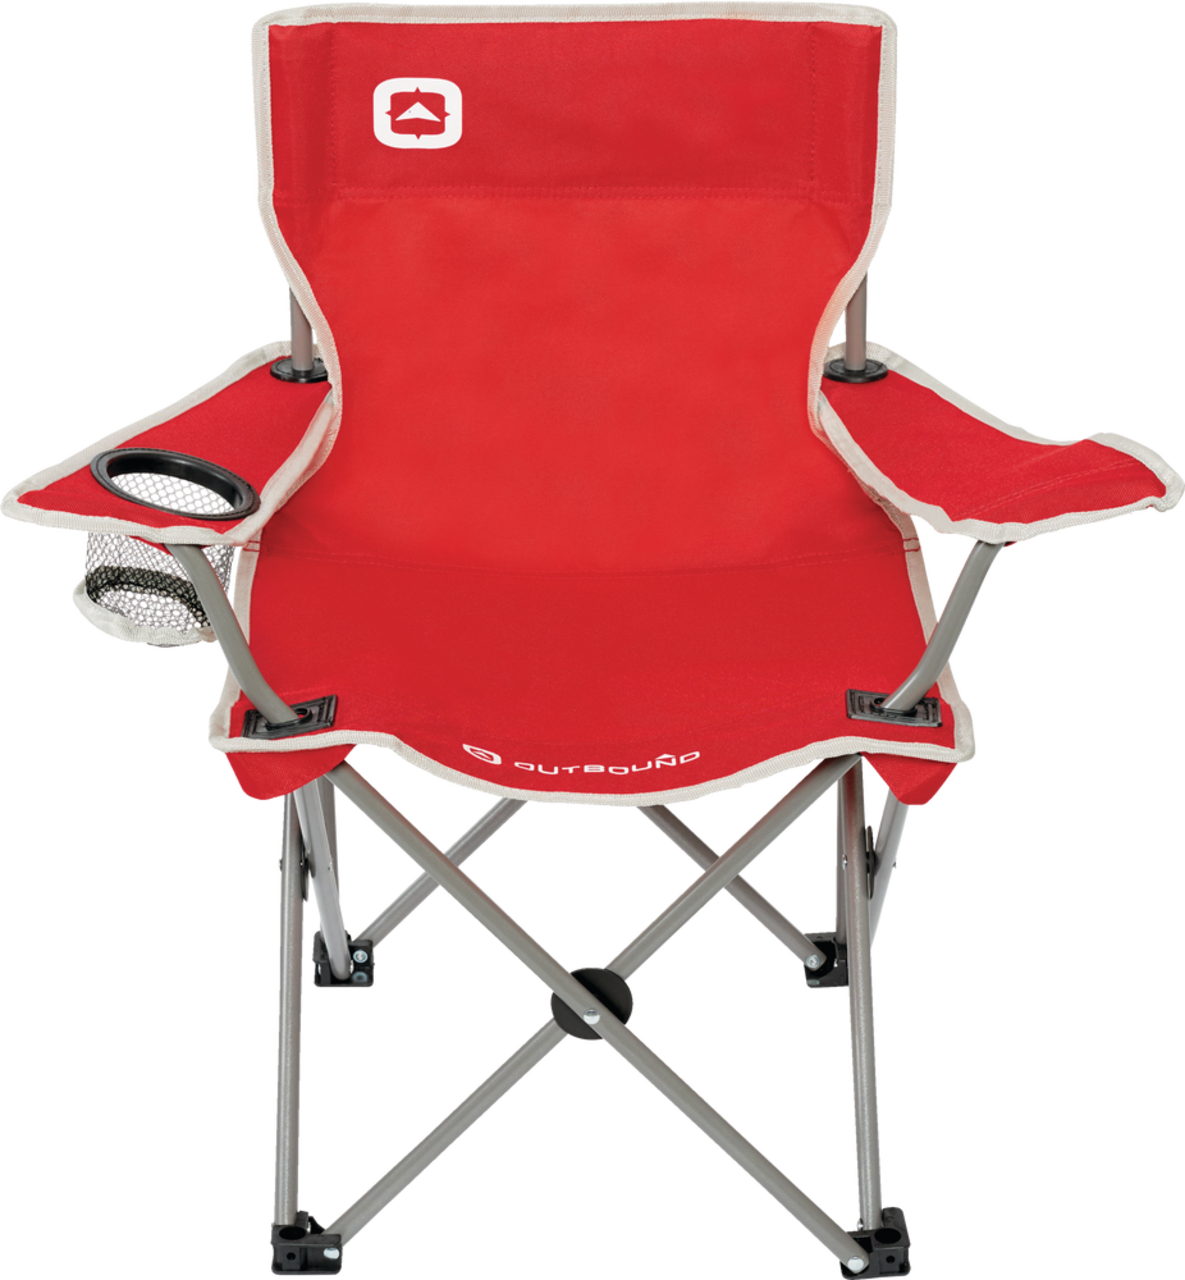 https://media-www.canadiantire.ca/product/playing/camping/camping-furniture/0765473/outbound-kids-folding-chair-3479c4f2-d9ac-4ded-a605-a0ce1a82a667.png?imdensity=1&imwidth=1244&impolicy=mZoom